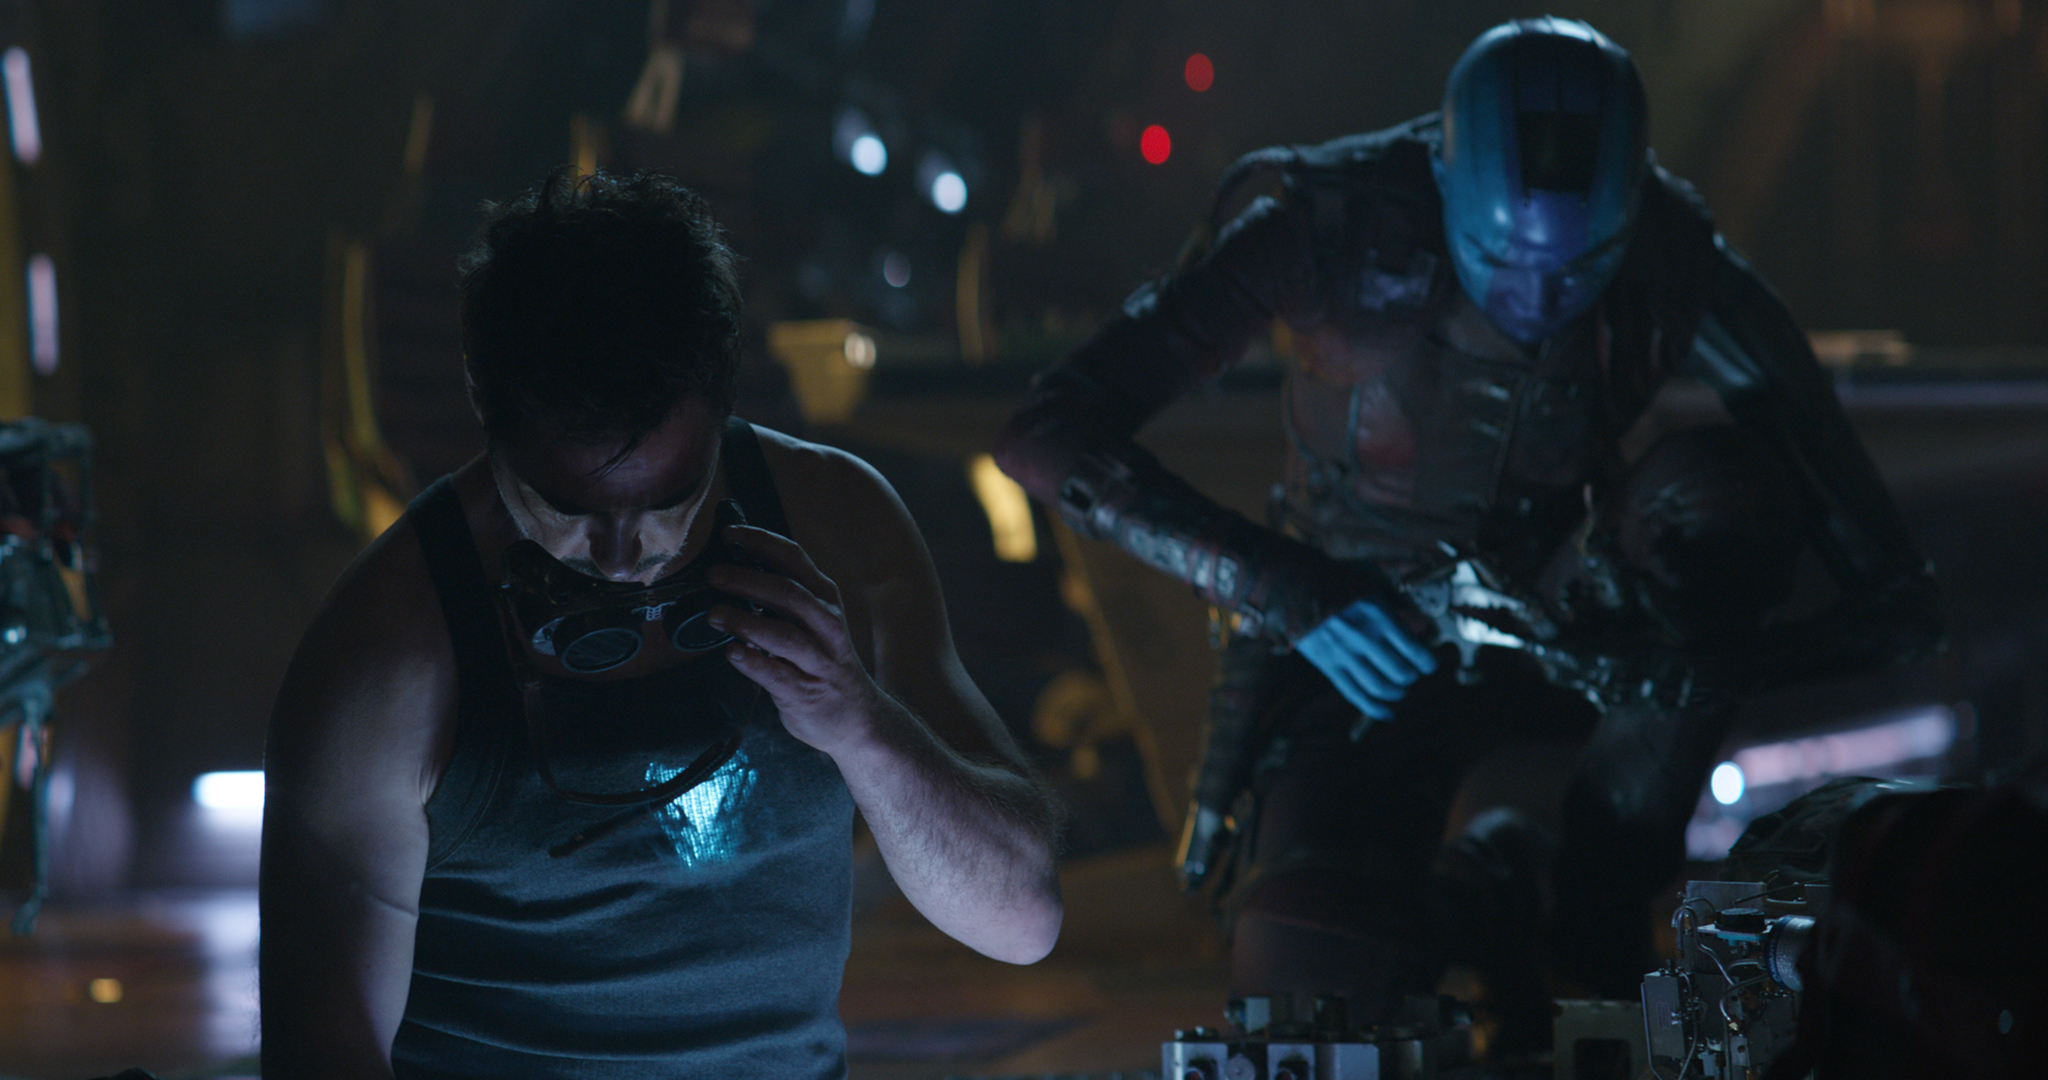 Avengers: Endgame Image Tease Emotional Reunions And Team Ups